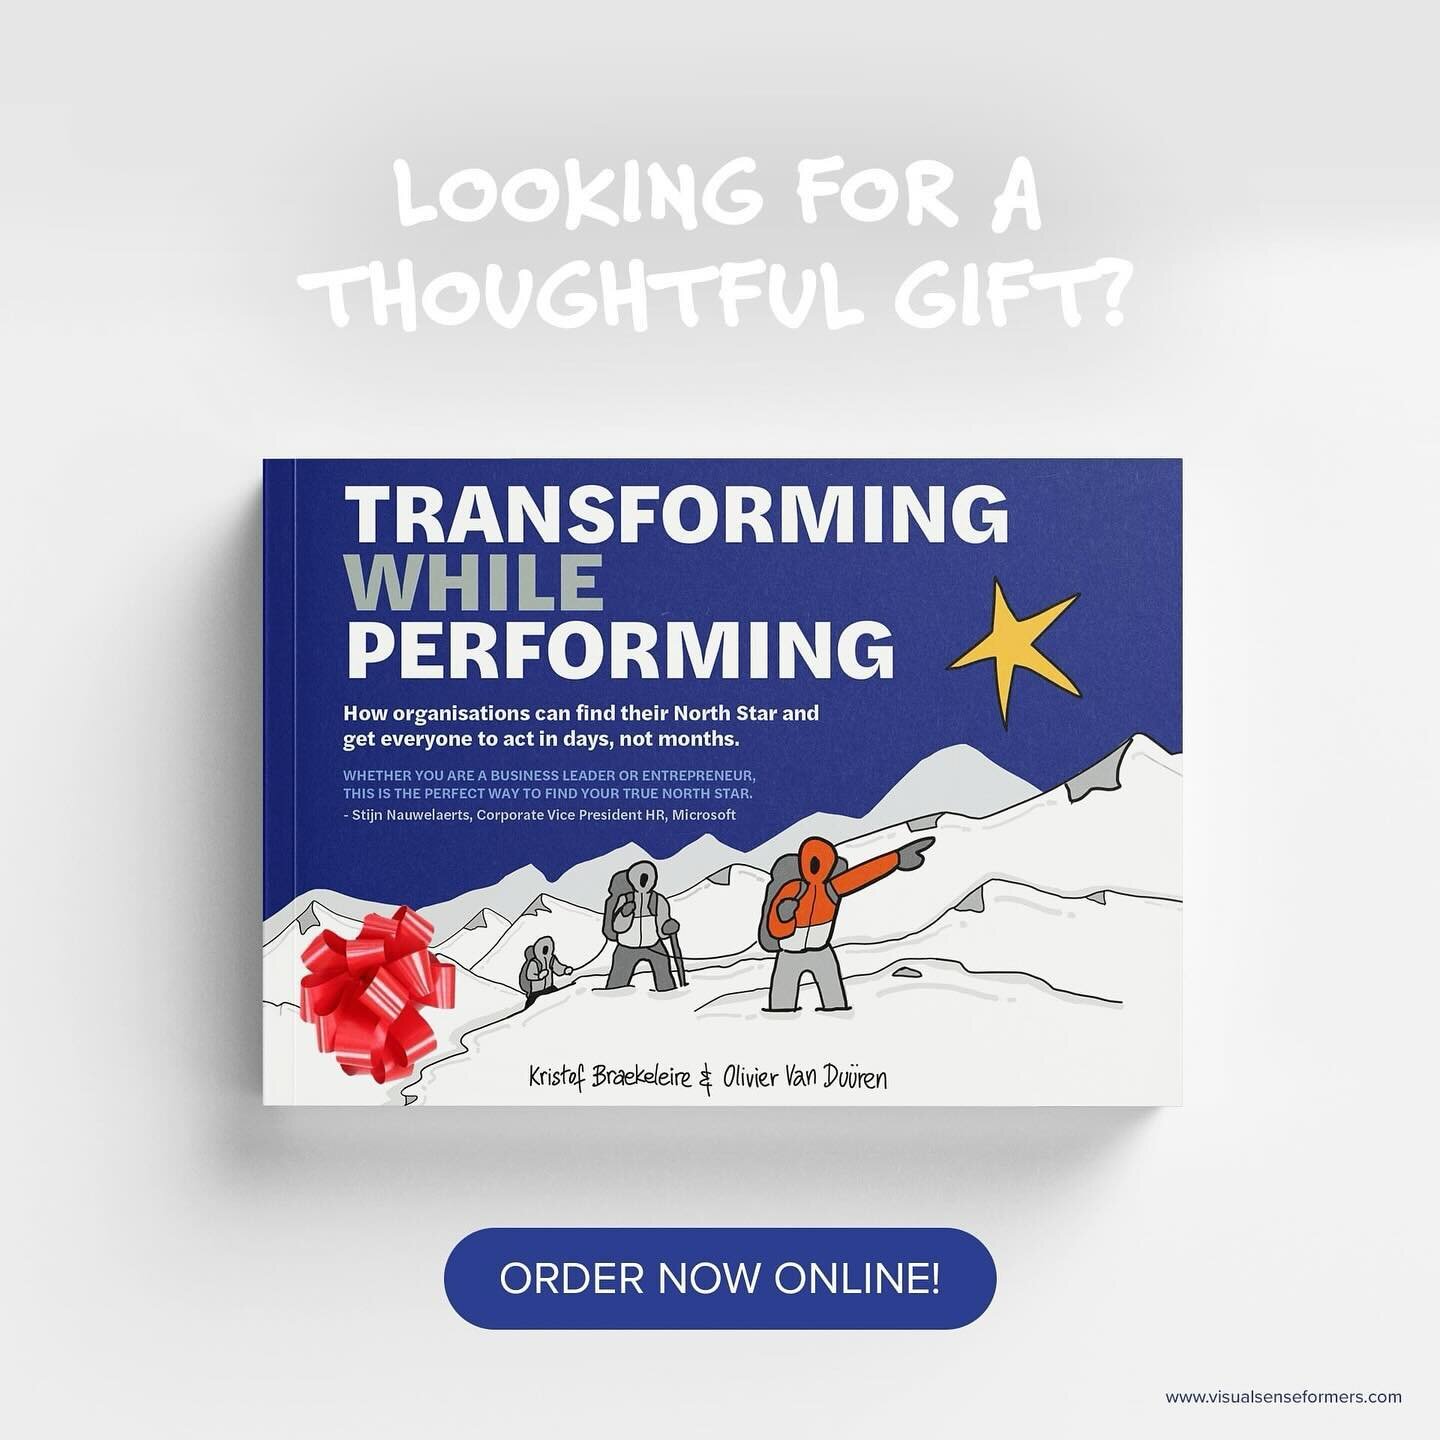 🎁 Looking for a meaningful holiday gift for yourself, friends, family, or colleagues? Dive into the insights of our book &lsquo;𝗧𝗿𝗮𝗻𝘀𝗳𝗼𝗿𝗺𝗶𝗻𝗴 𝘄𝗵𝗶𝗹𝗲𝗽𝗲𝗿𝗳𝗼𝗿𝗺𝗶𝗻𝗴&rsquo; - a beacon for decision-makers, entrepreneurs, innovators,